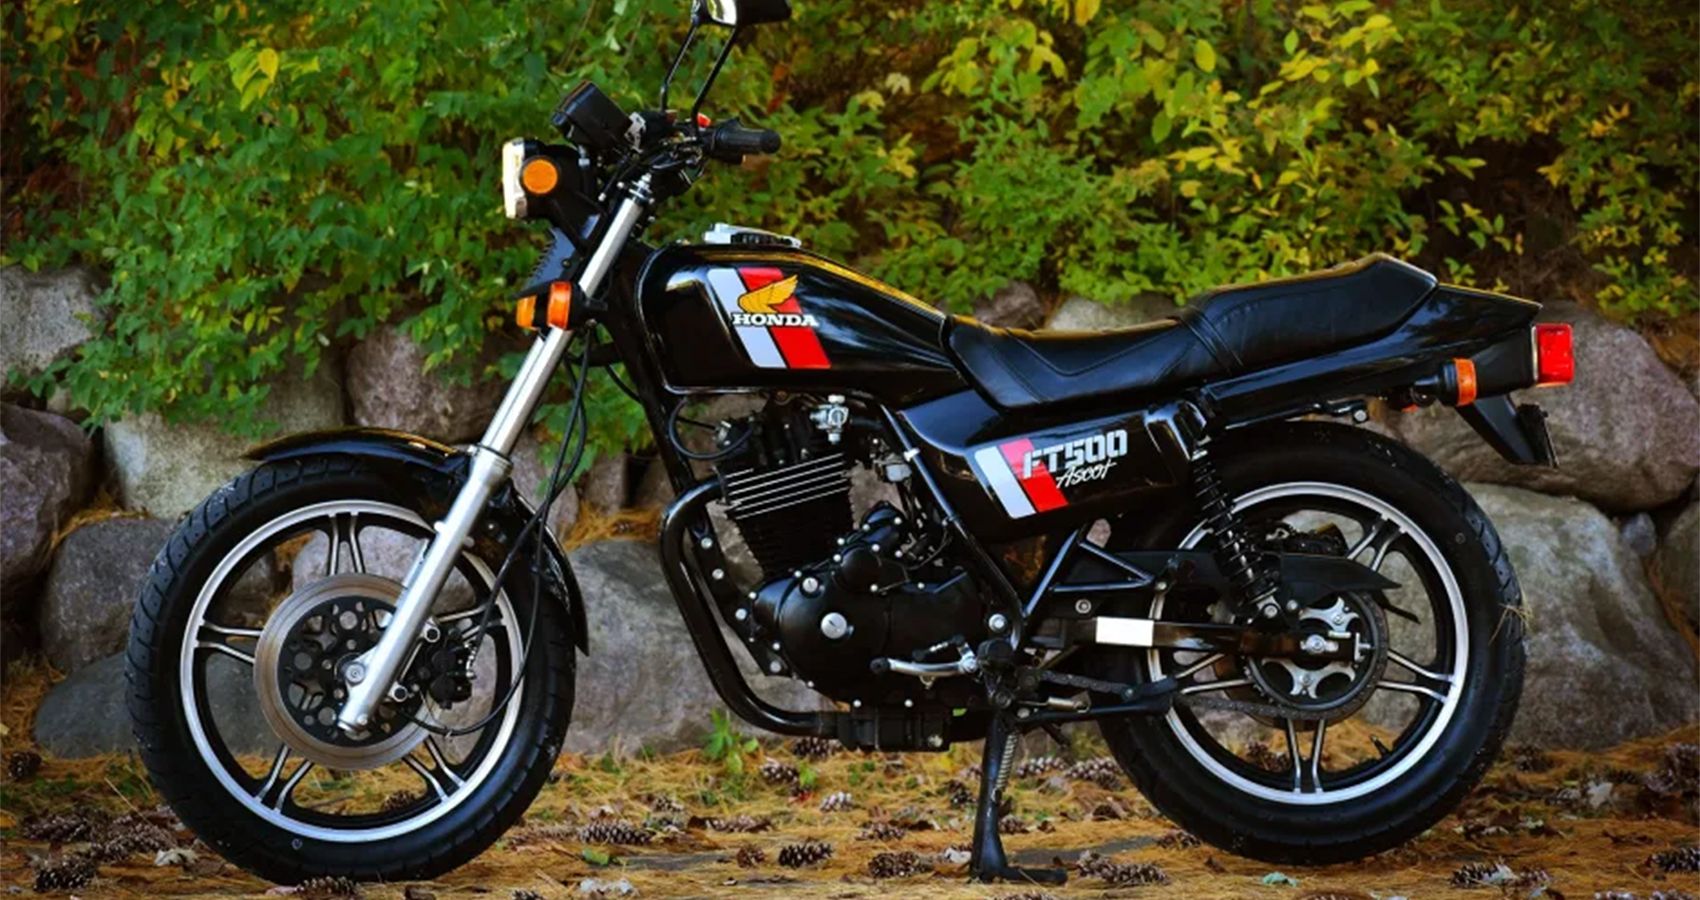 Why No One Wants To Be Associated With This 1980s Honda Motorcycle